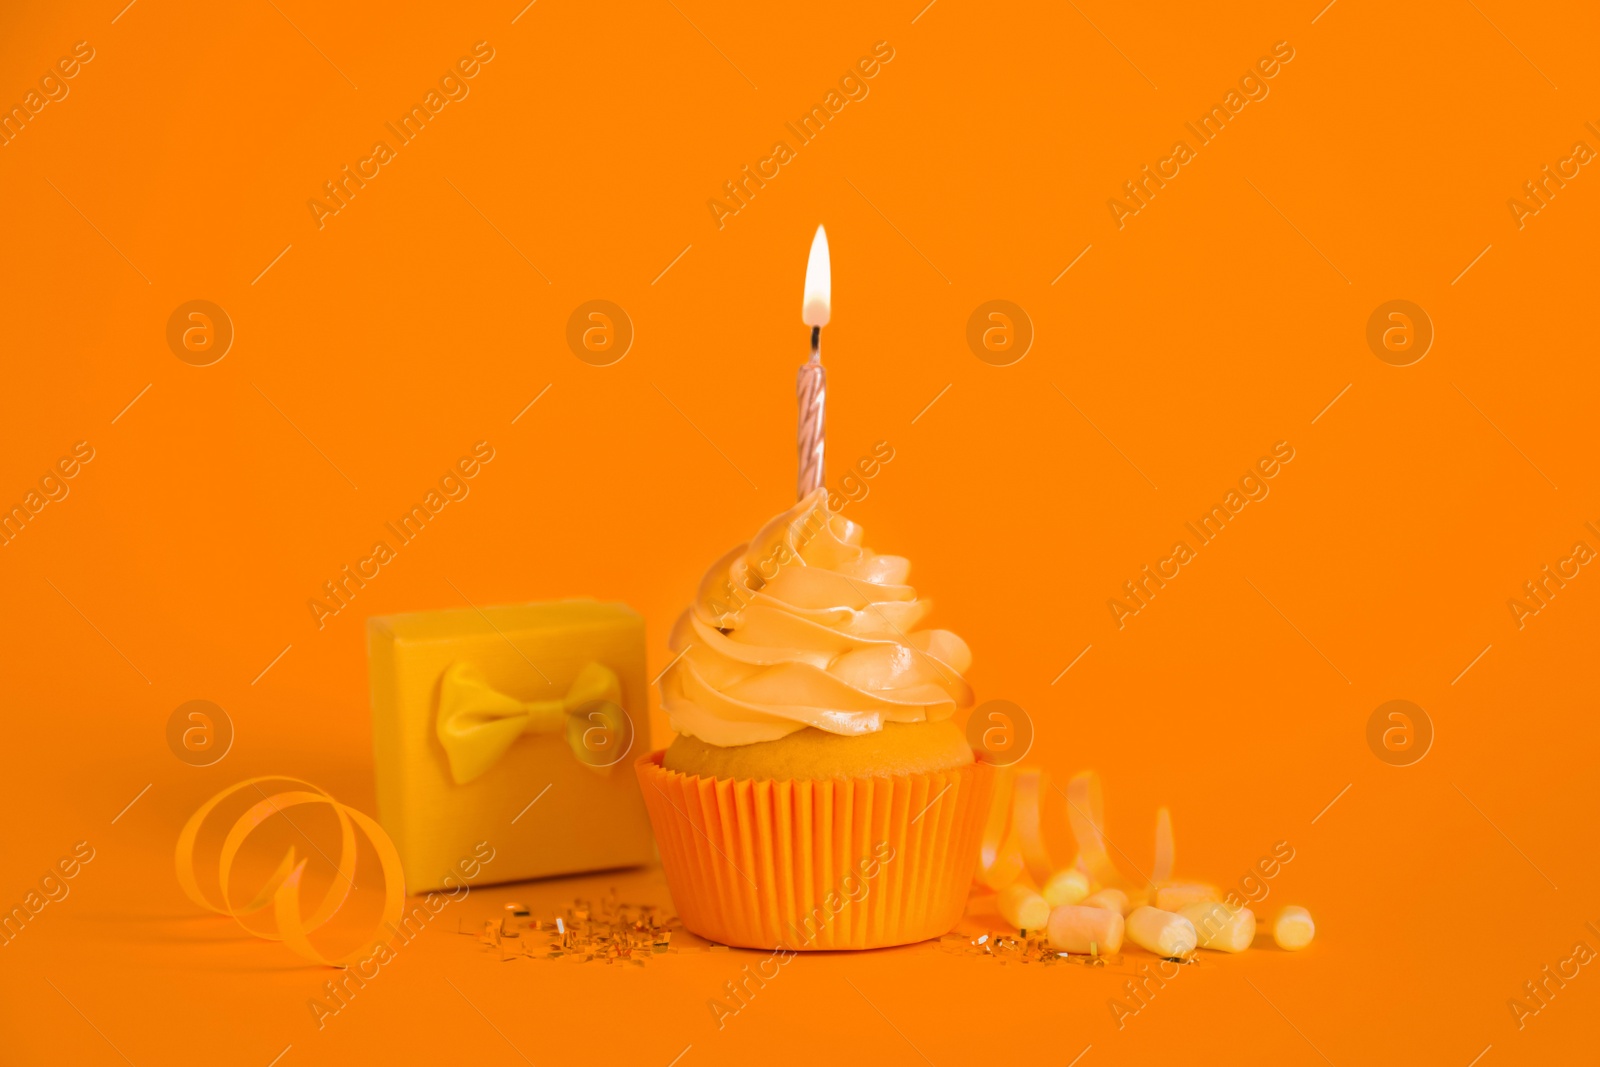 Image of Delicious birthday cupcake with burning candle, marshmallows and gift box on orange background